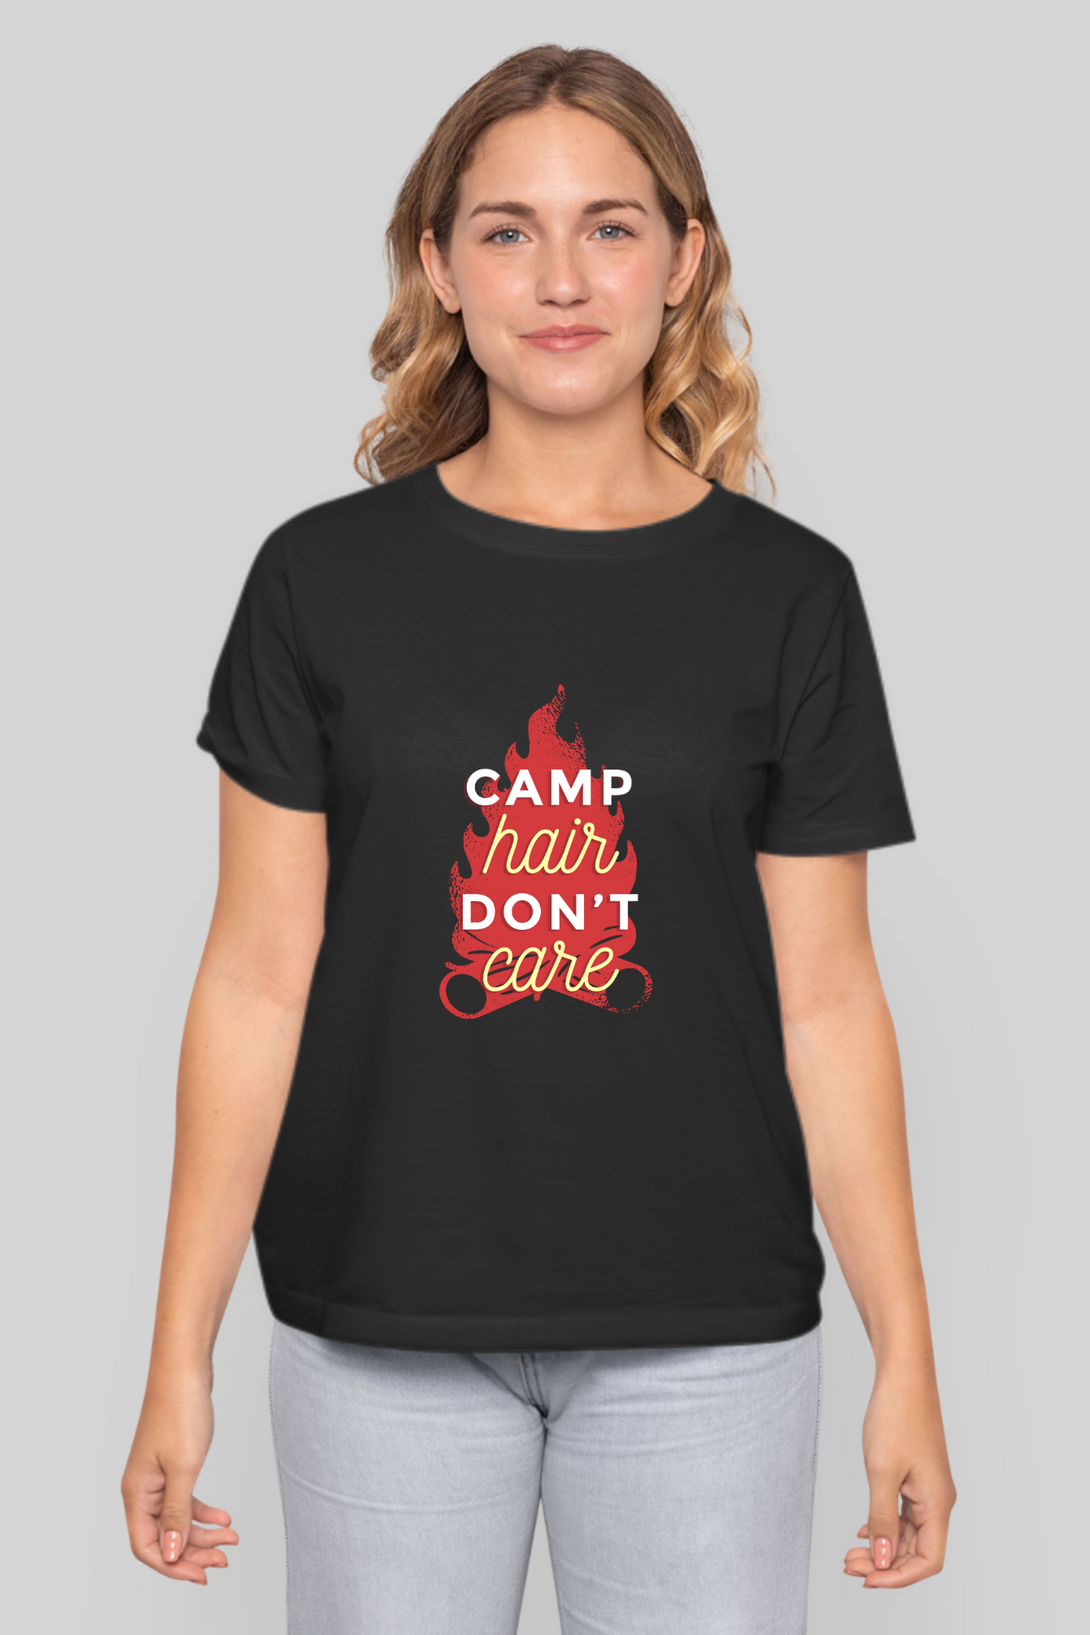 Camping Vibes Printed T-Shirt For Women - WowWaves - 12